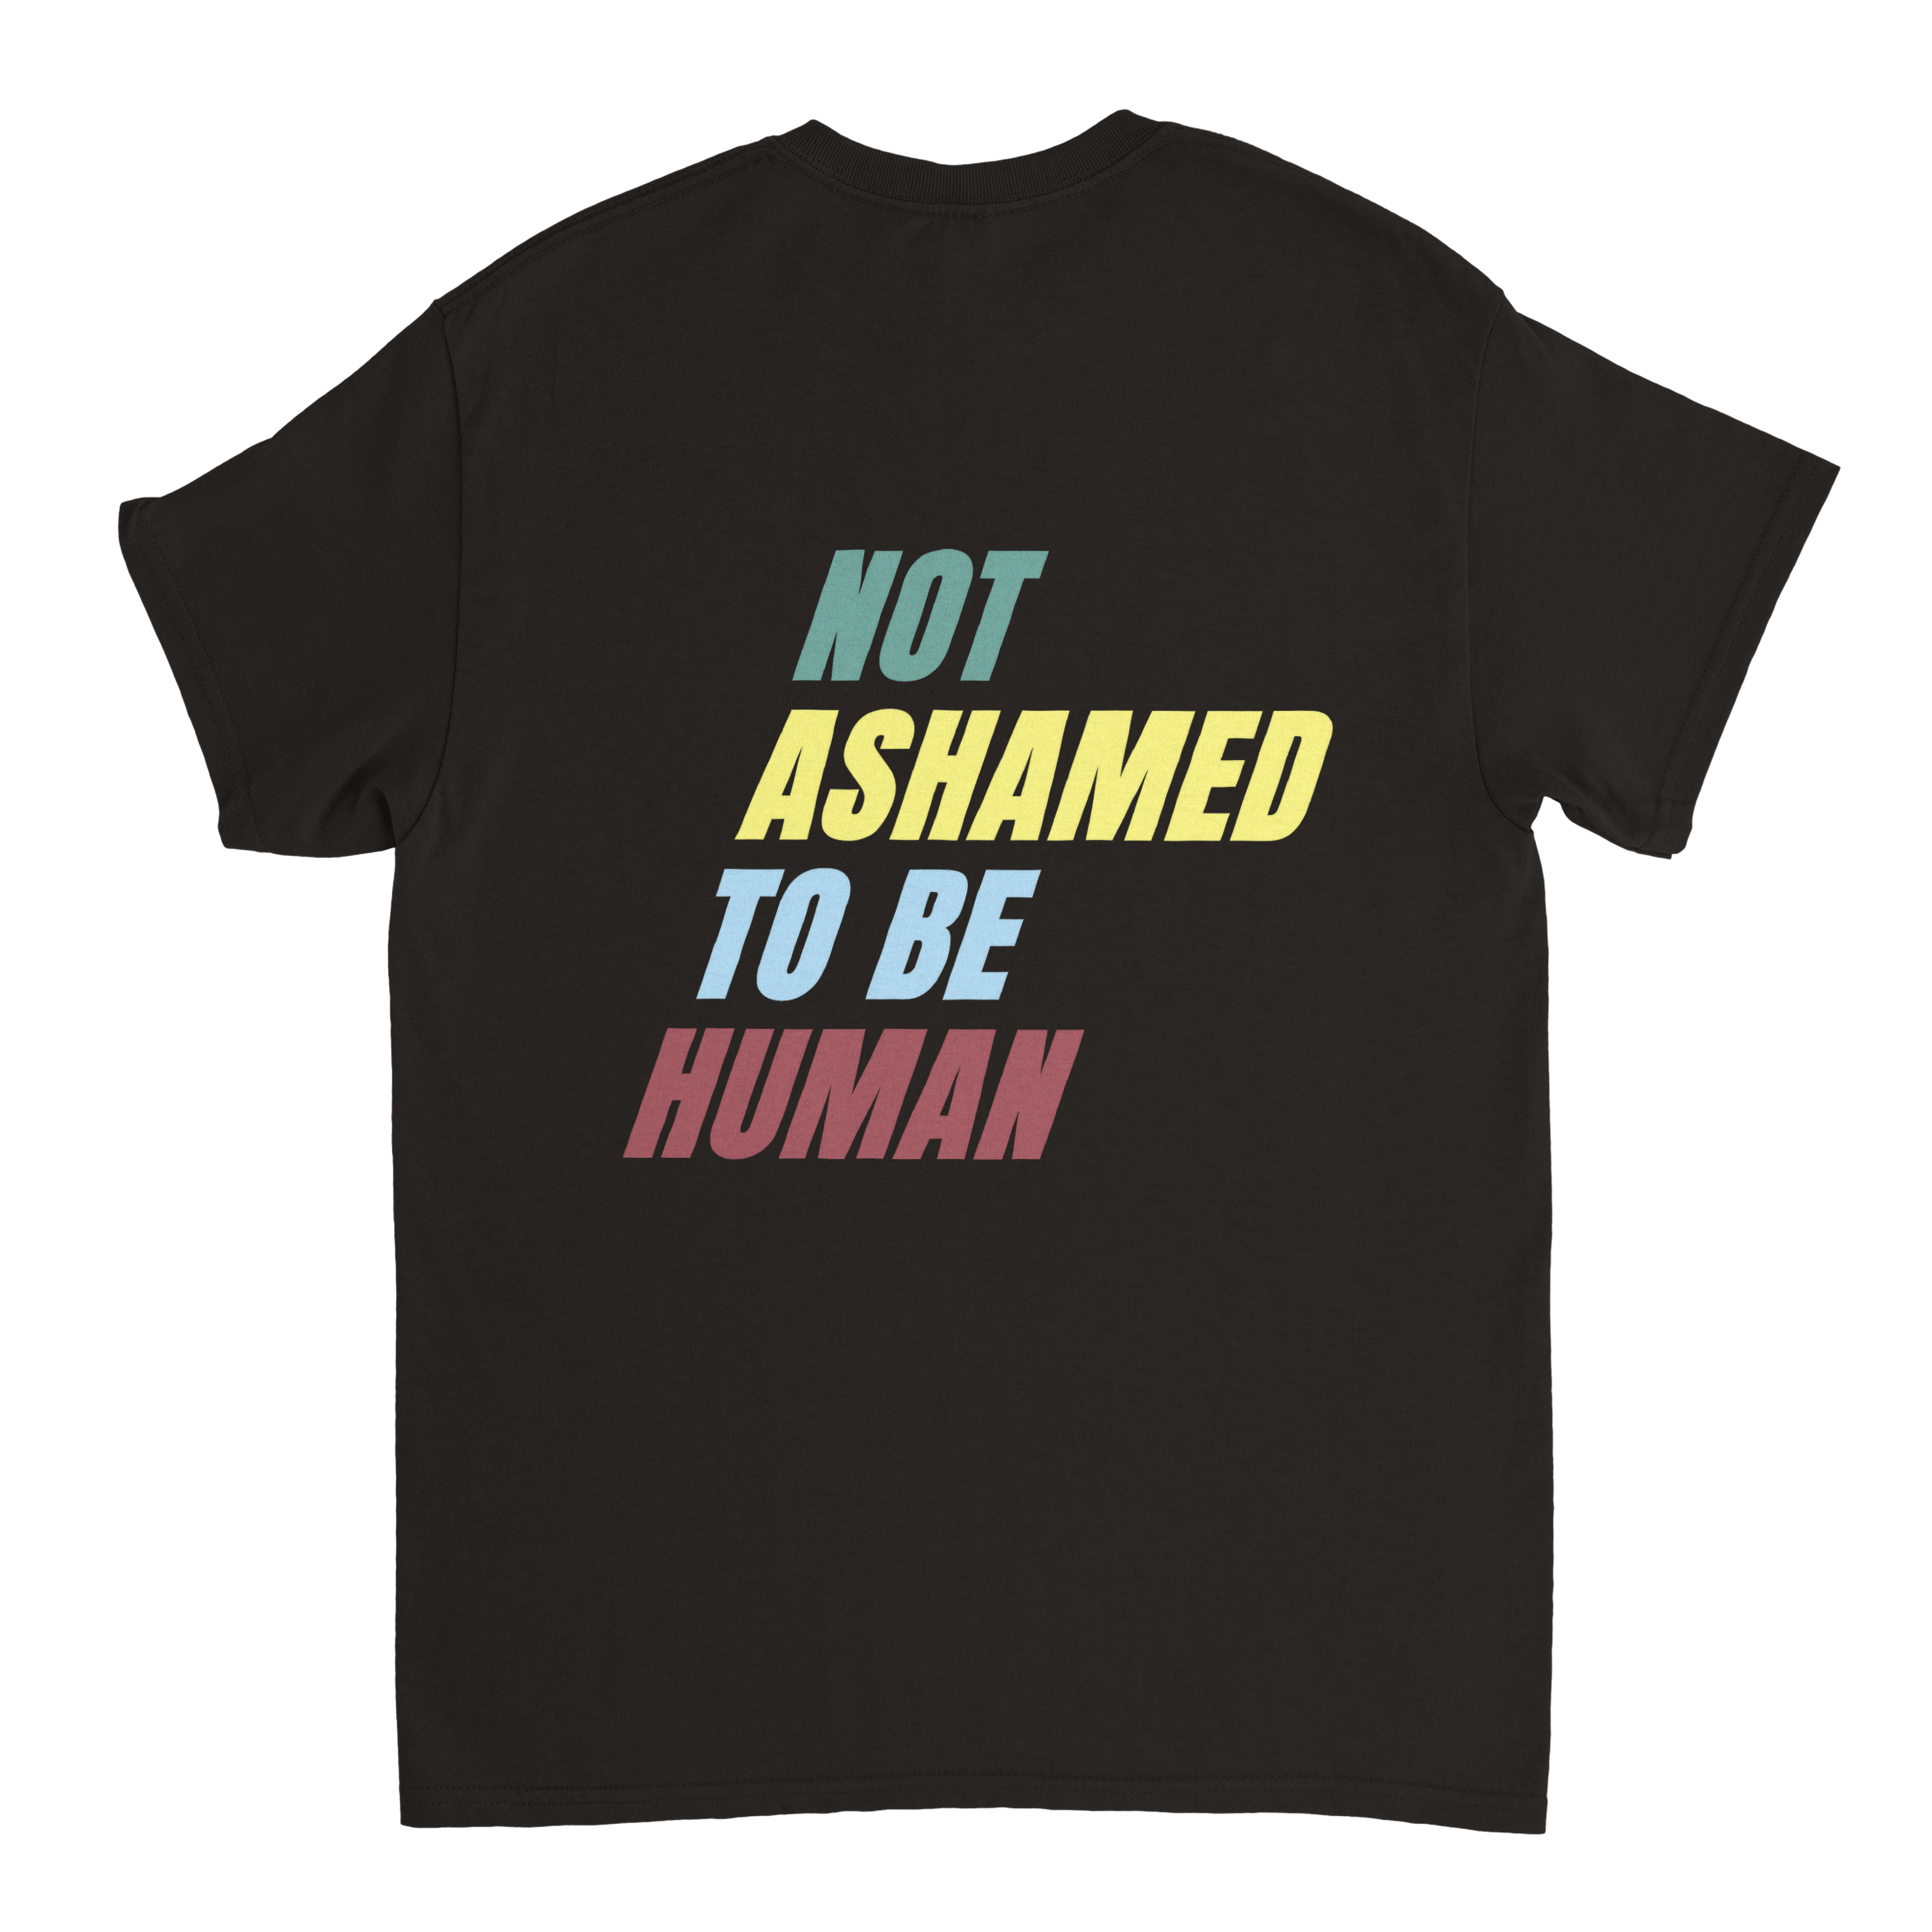 Not Ashamed To Be Human - Tee